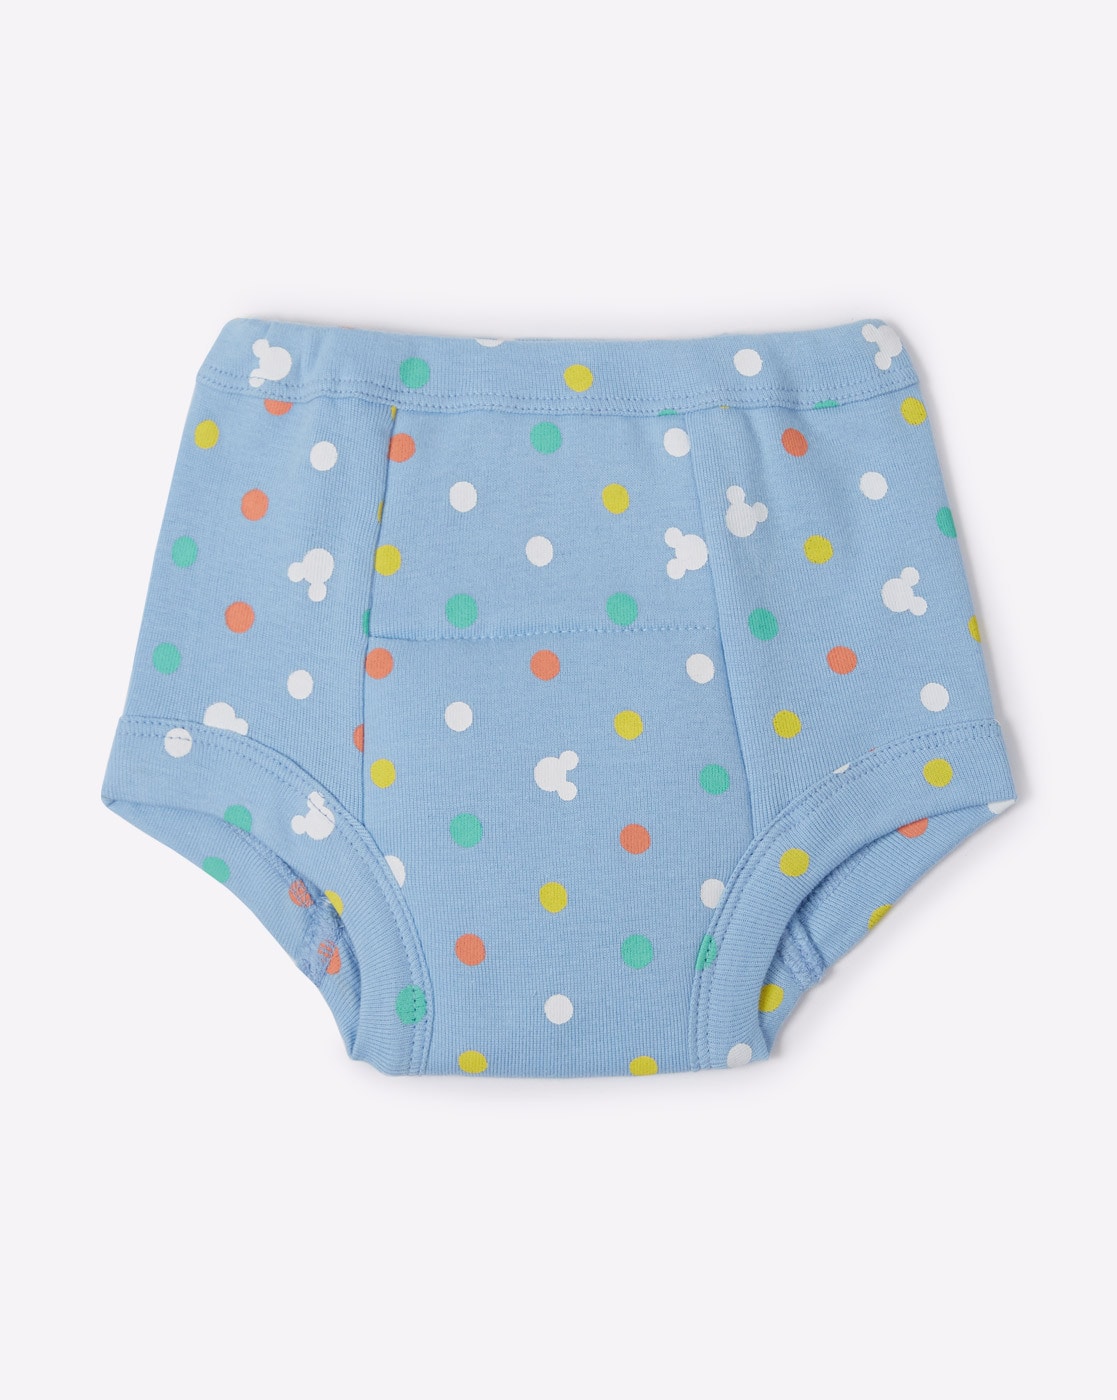 Training Pants Buy Best Quality Potty Training Pants  Mothercare India